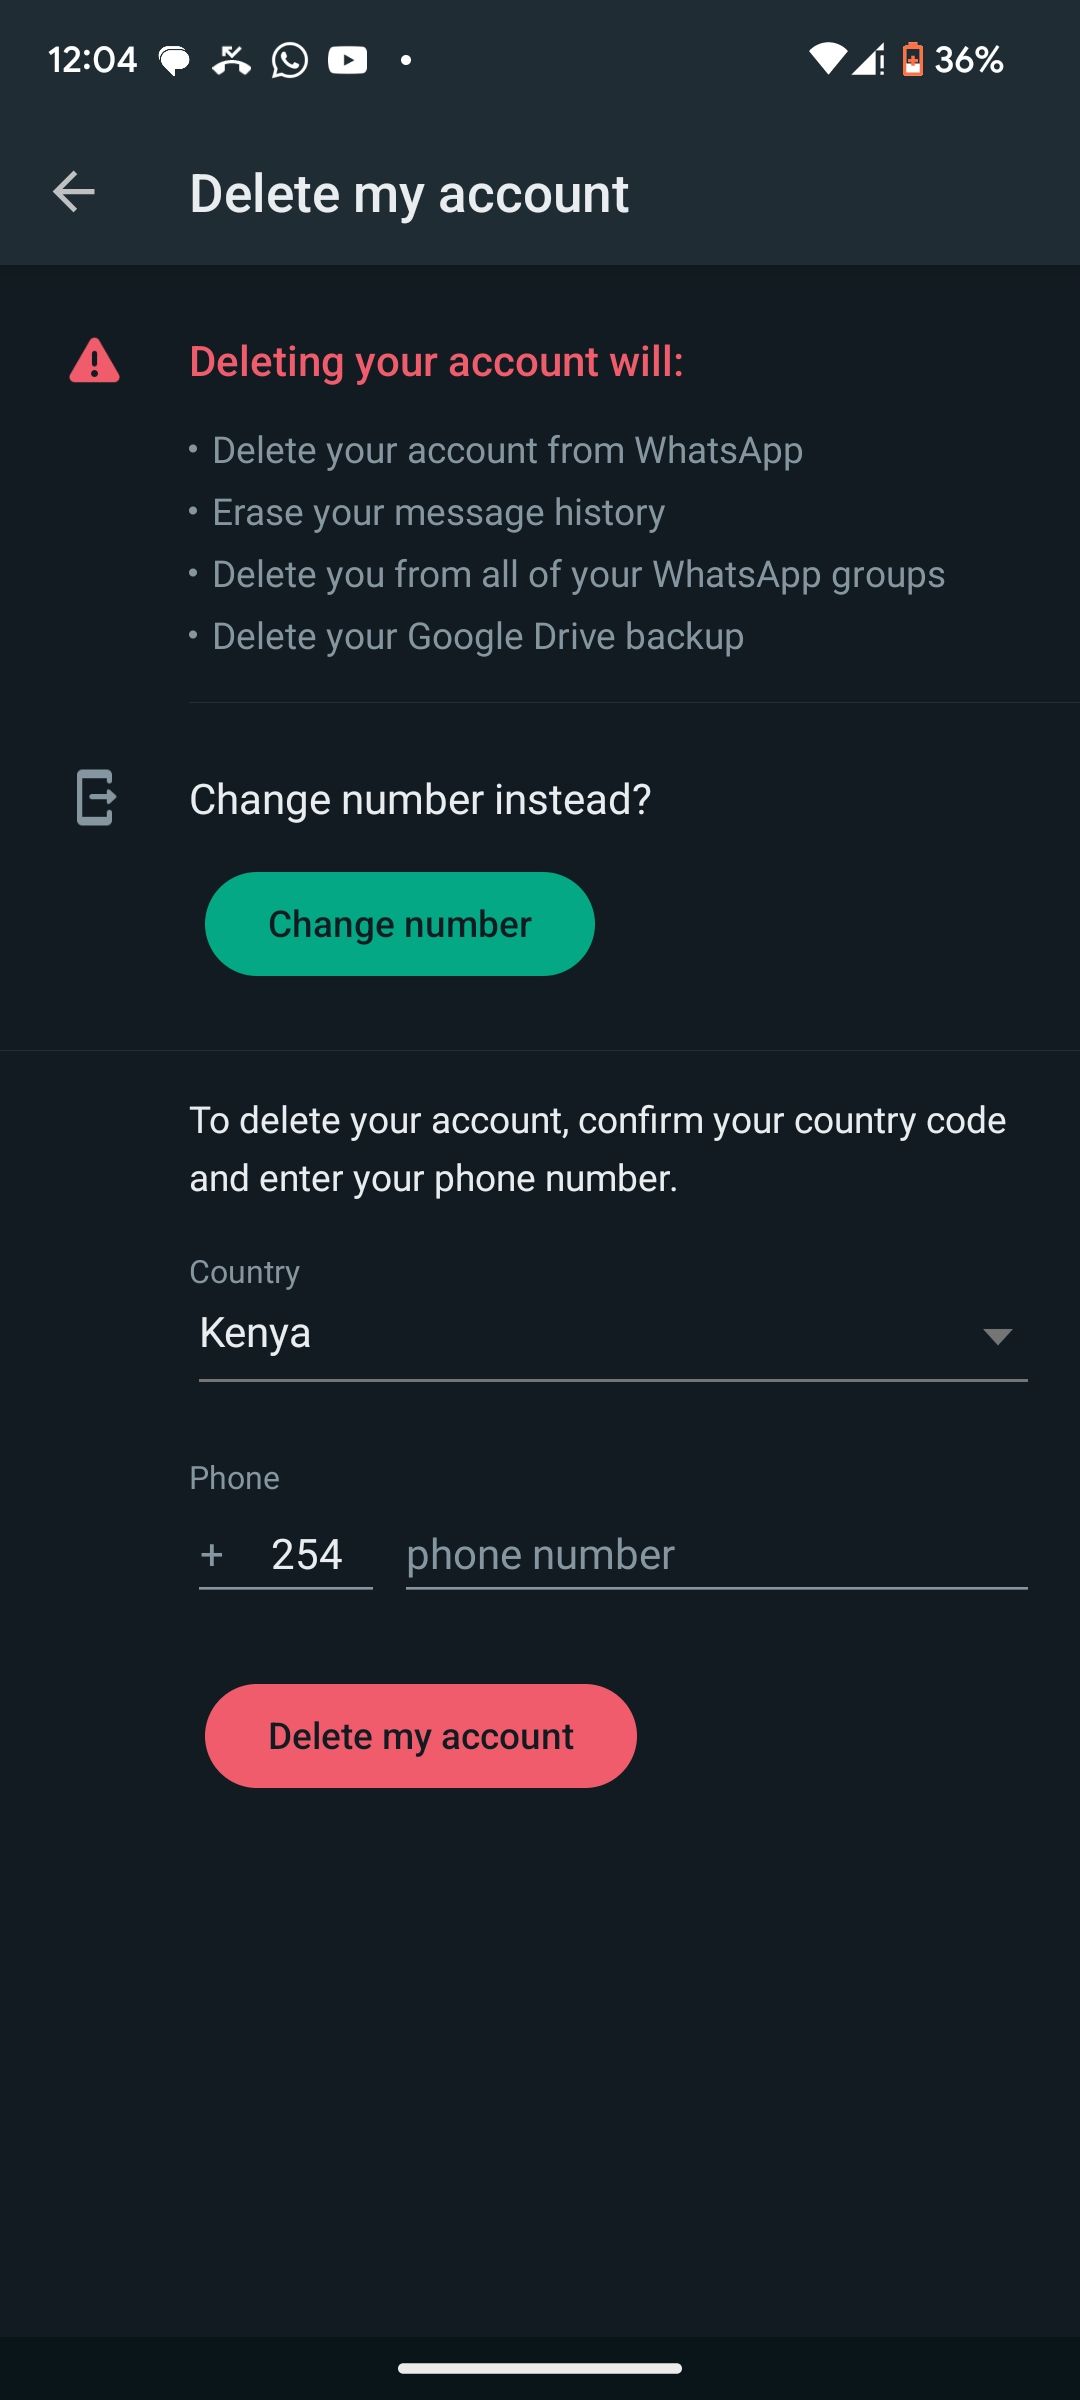 Confirming a WhatsApp number for account deletion